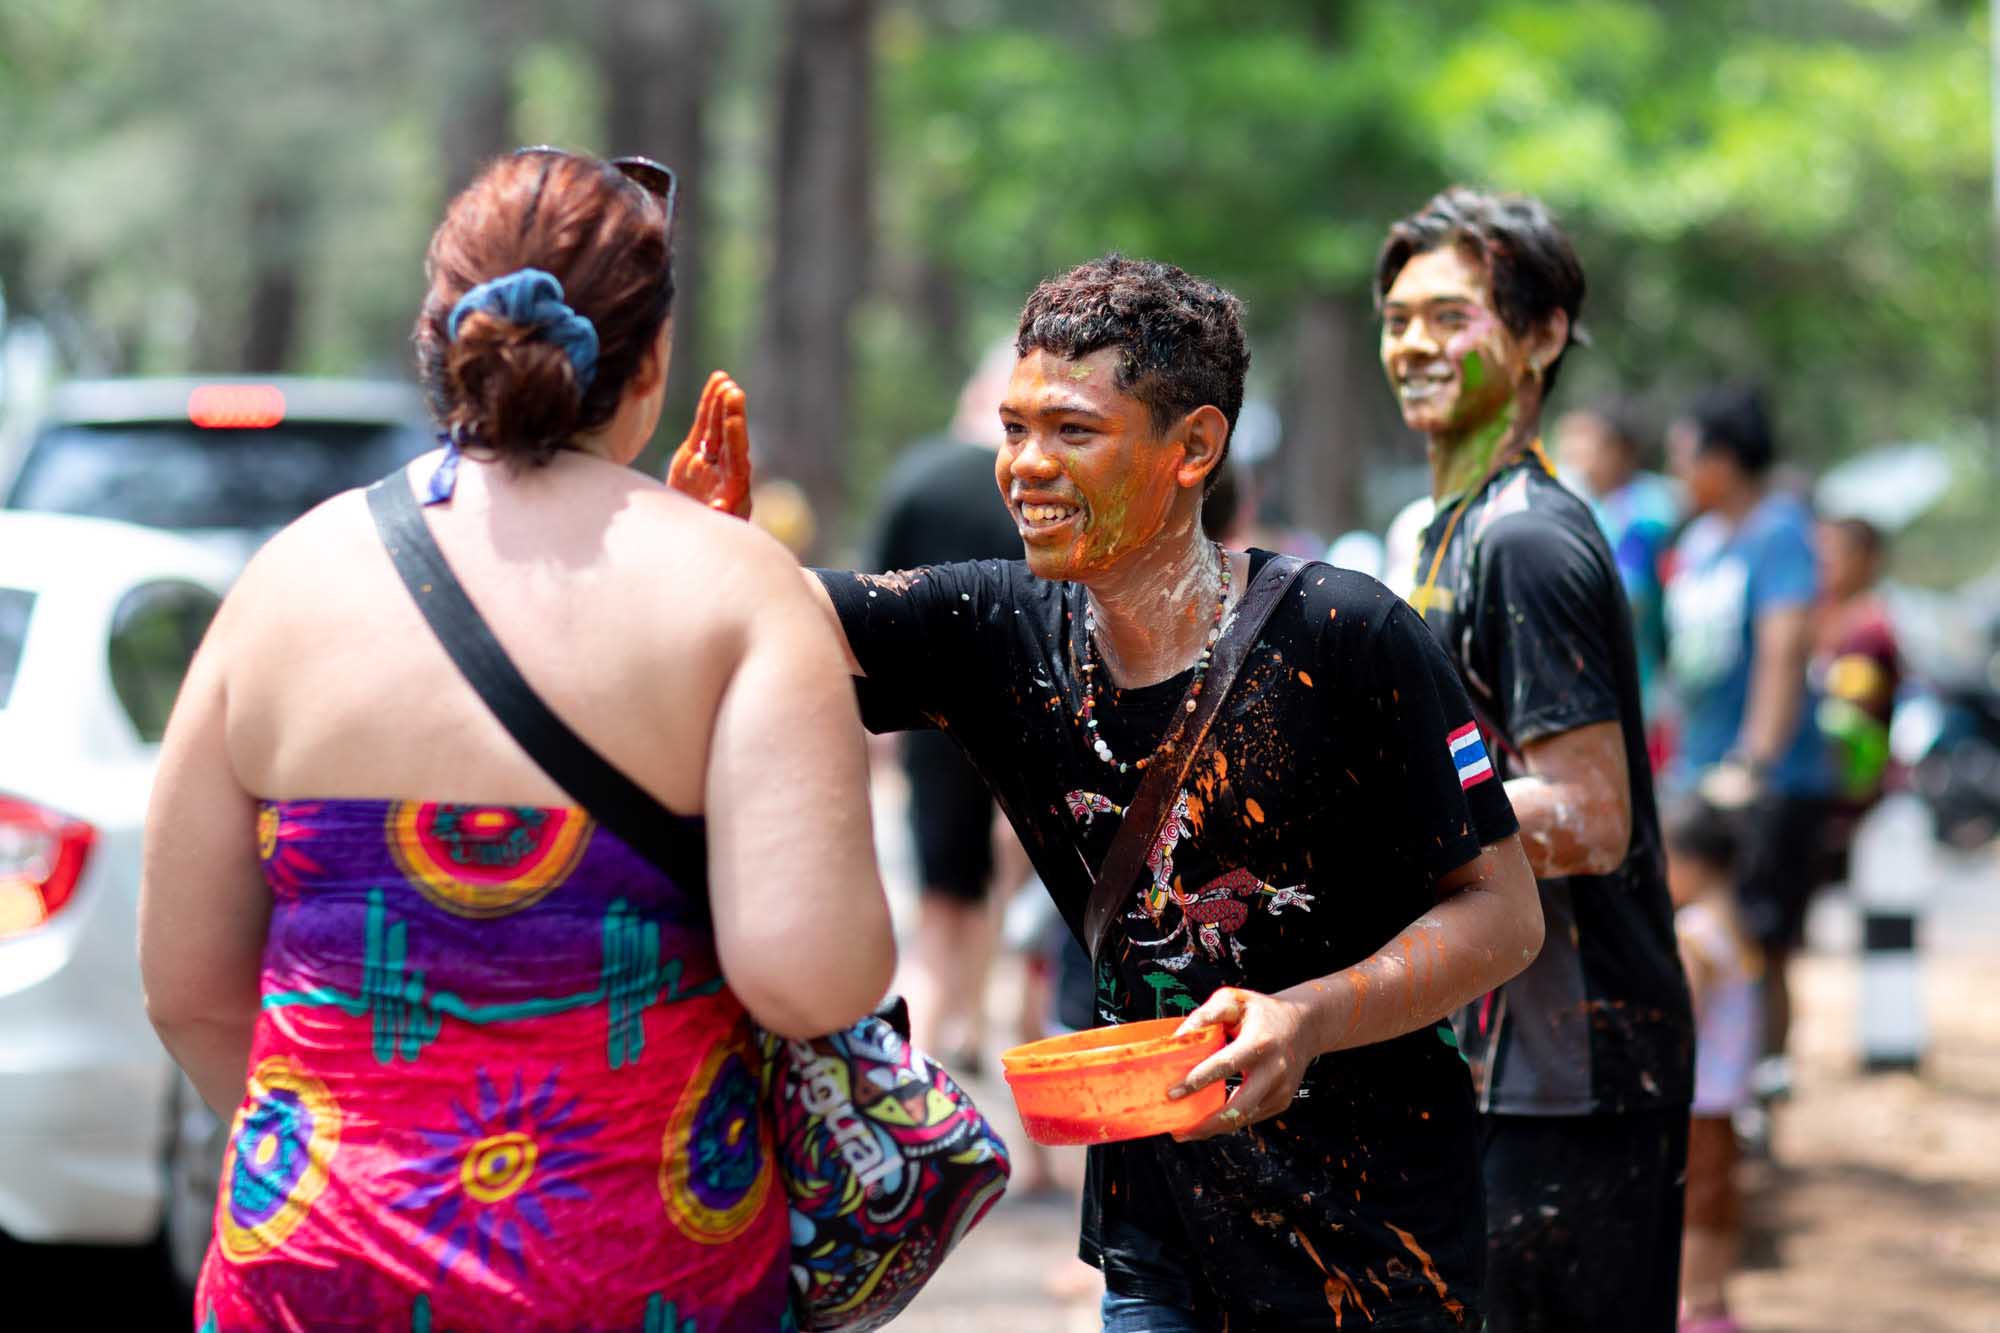 Woman gets paint put on her face during Songkran water festival in Phuket, Thailand